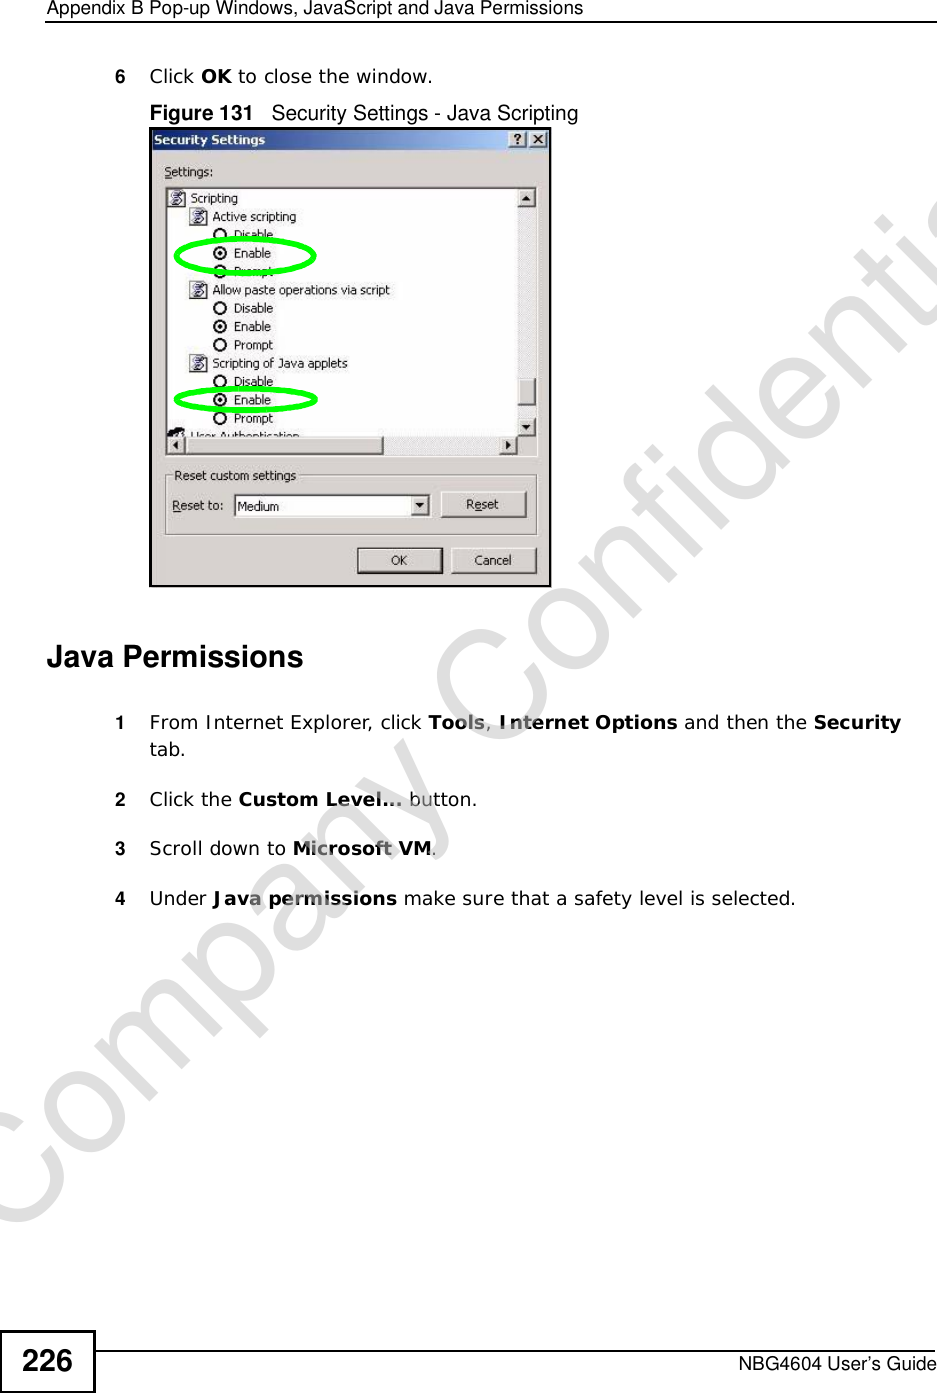 Appendix BPop-up Windows, JavaScript and Java PermissionsNBG4604 User’s Guide2266Click OK to close the window.Figure 131   Security Settings - Java ScriptingJava Permissions1From Internet Explorer, click Tools,Internet Options and then the Securitytab. 2Click the Custom Level... button. 3Scroll down to Microsoft VM.4Under Java permissions make sure that a safety level is selected.Company Confidential